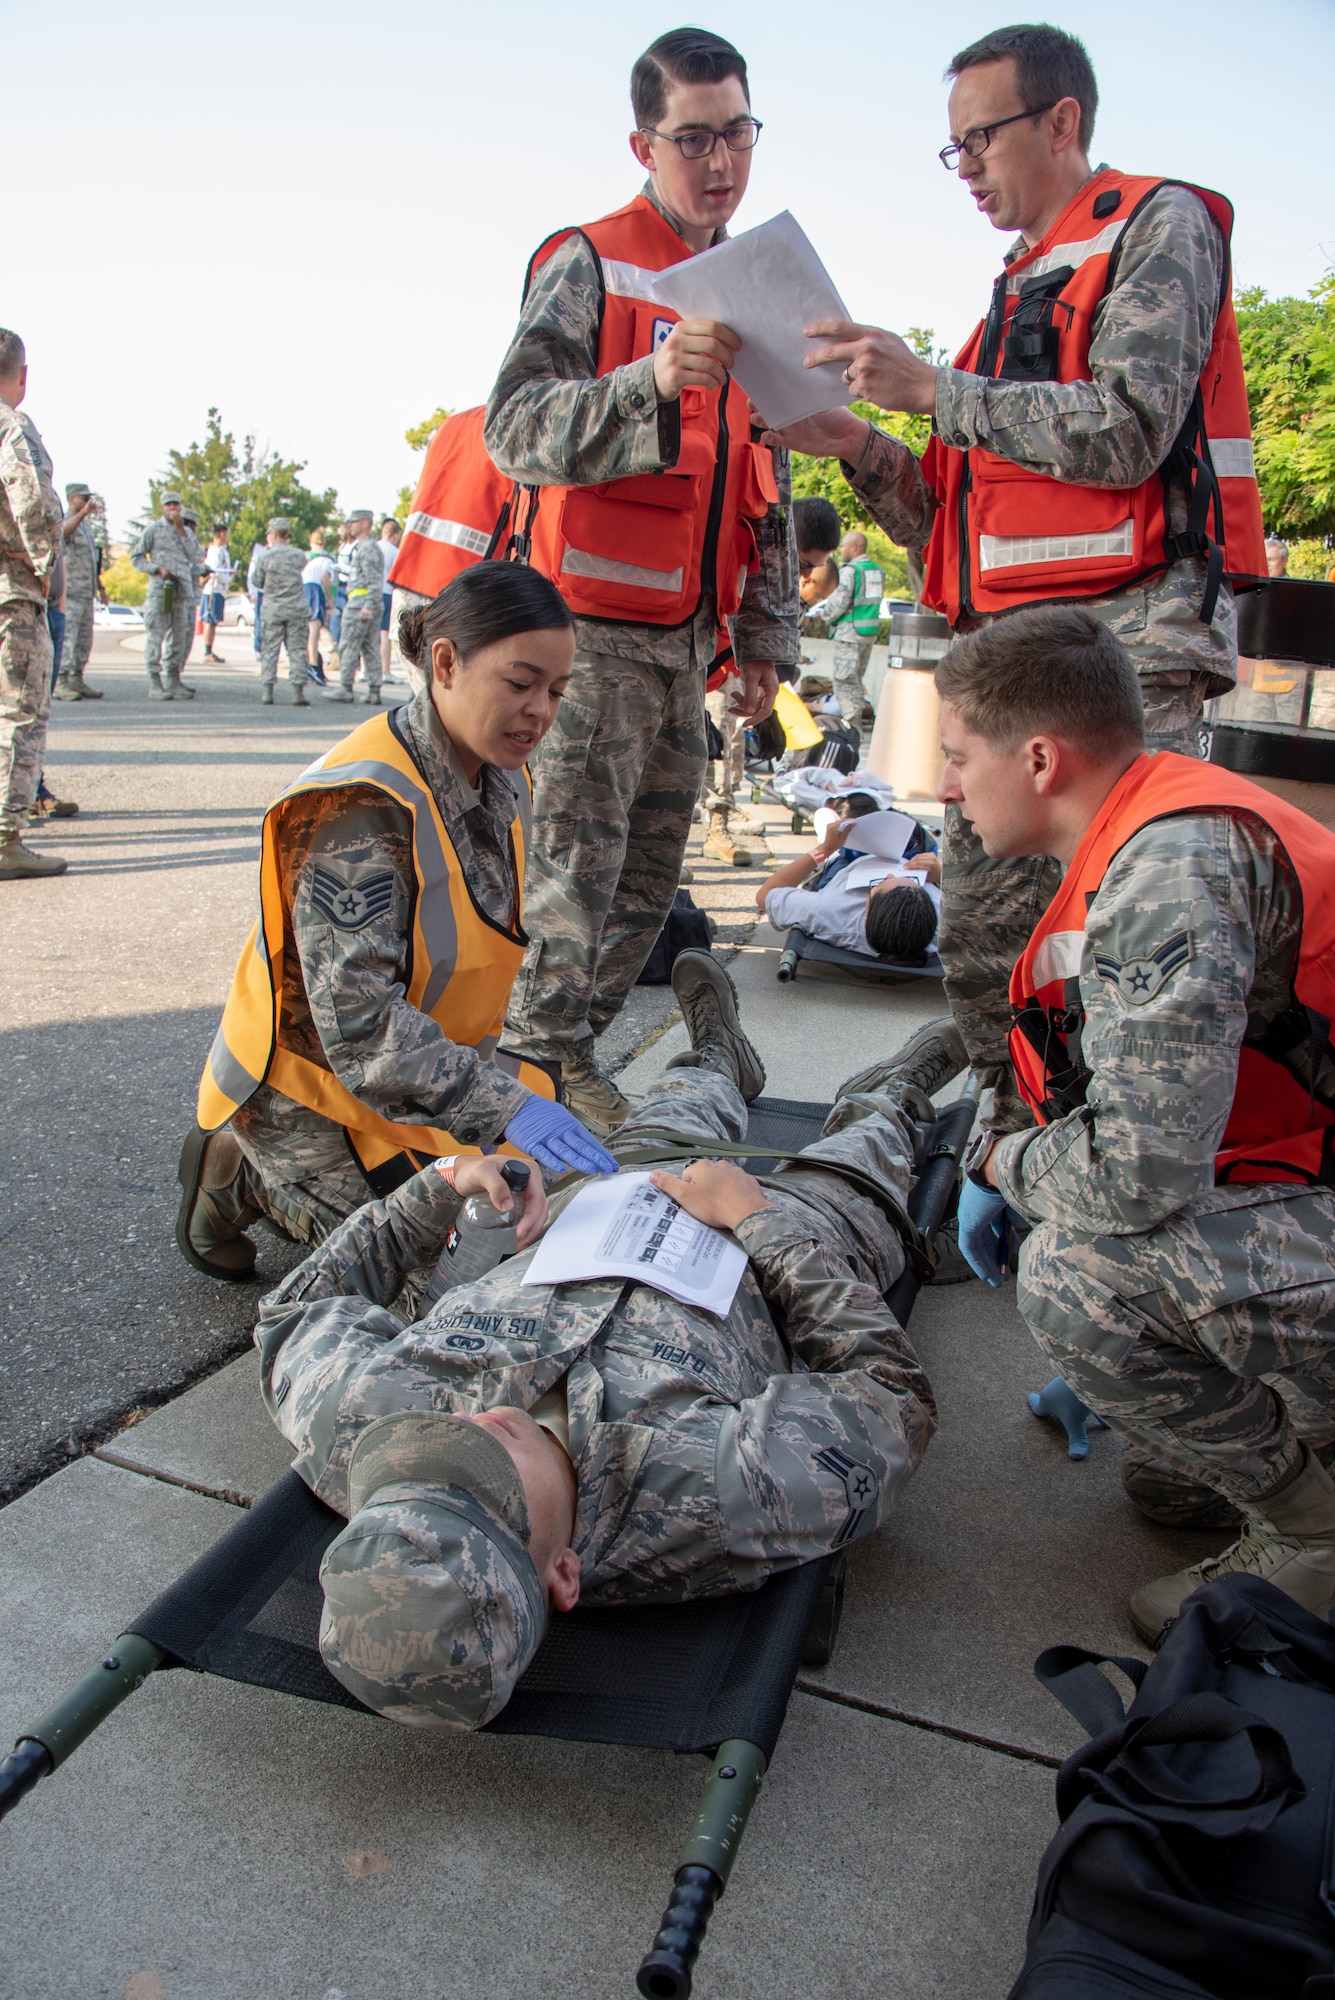 U.S. Air Force Airmen from the 60th Medical Group work to triage and treat simulated patients at David Grant USAF Medical Center during a Casualty Receiving Hospital exercise at Travis Air Force Base, Calif., August 22, 2018. The exercise simulated bringing in injured troops from overseas, triaging them at Travis, and then moving them to longer-term and advanced-care facilities. (U.S. Air Force Photo by Heide Couch)